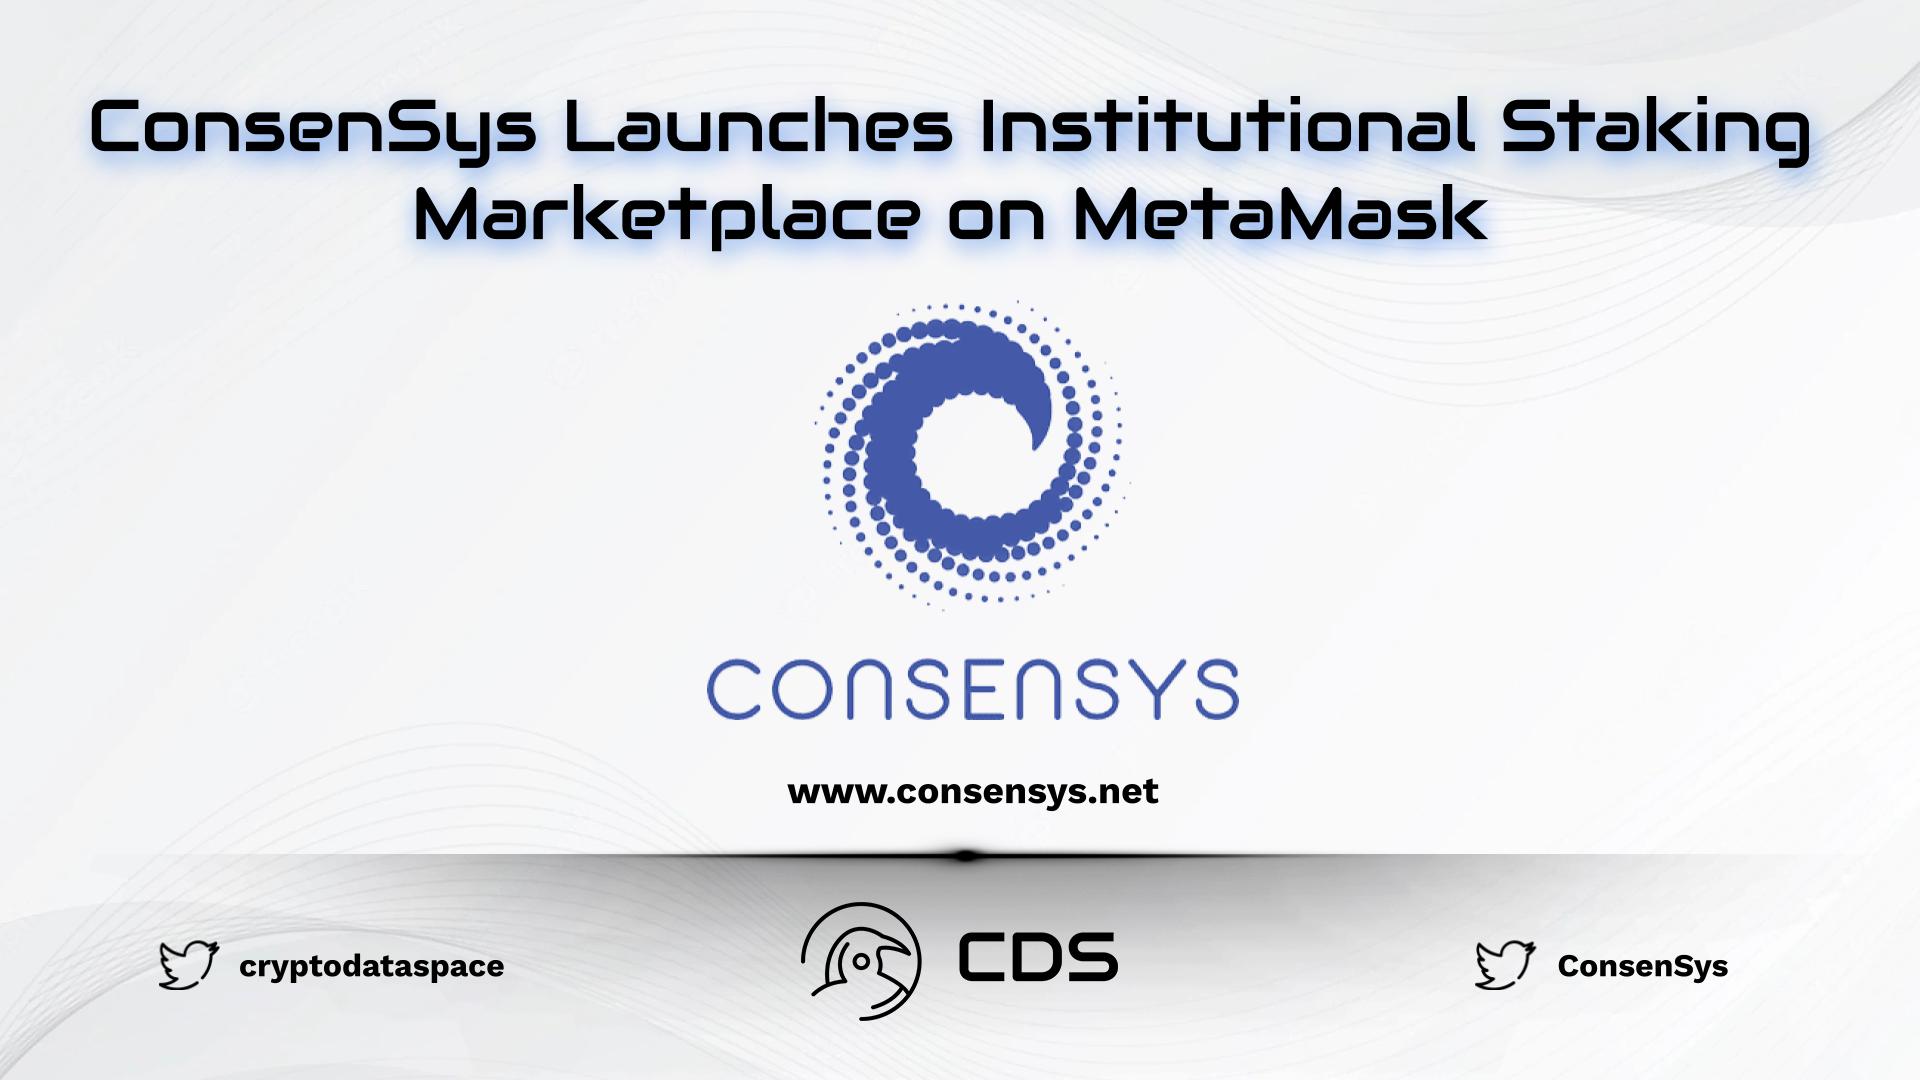 ConsenSys Launches Institutional Staking Marketplace on MetaMask